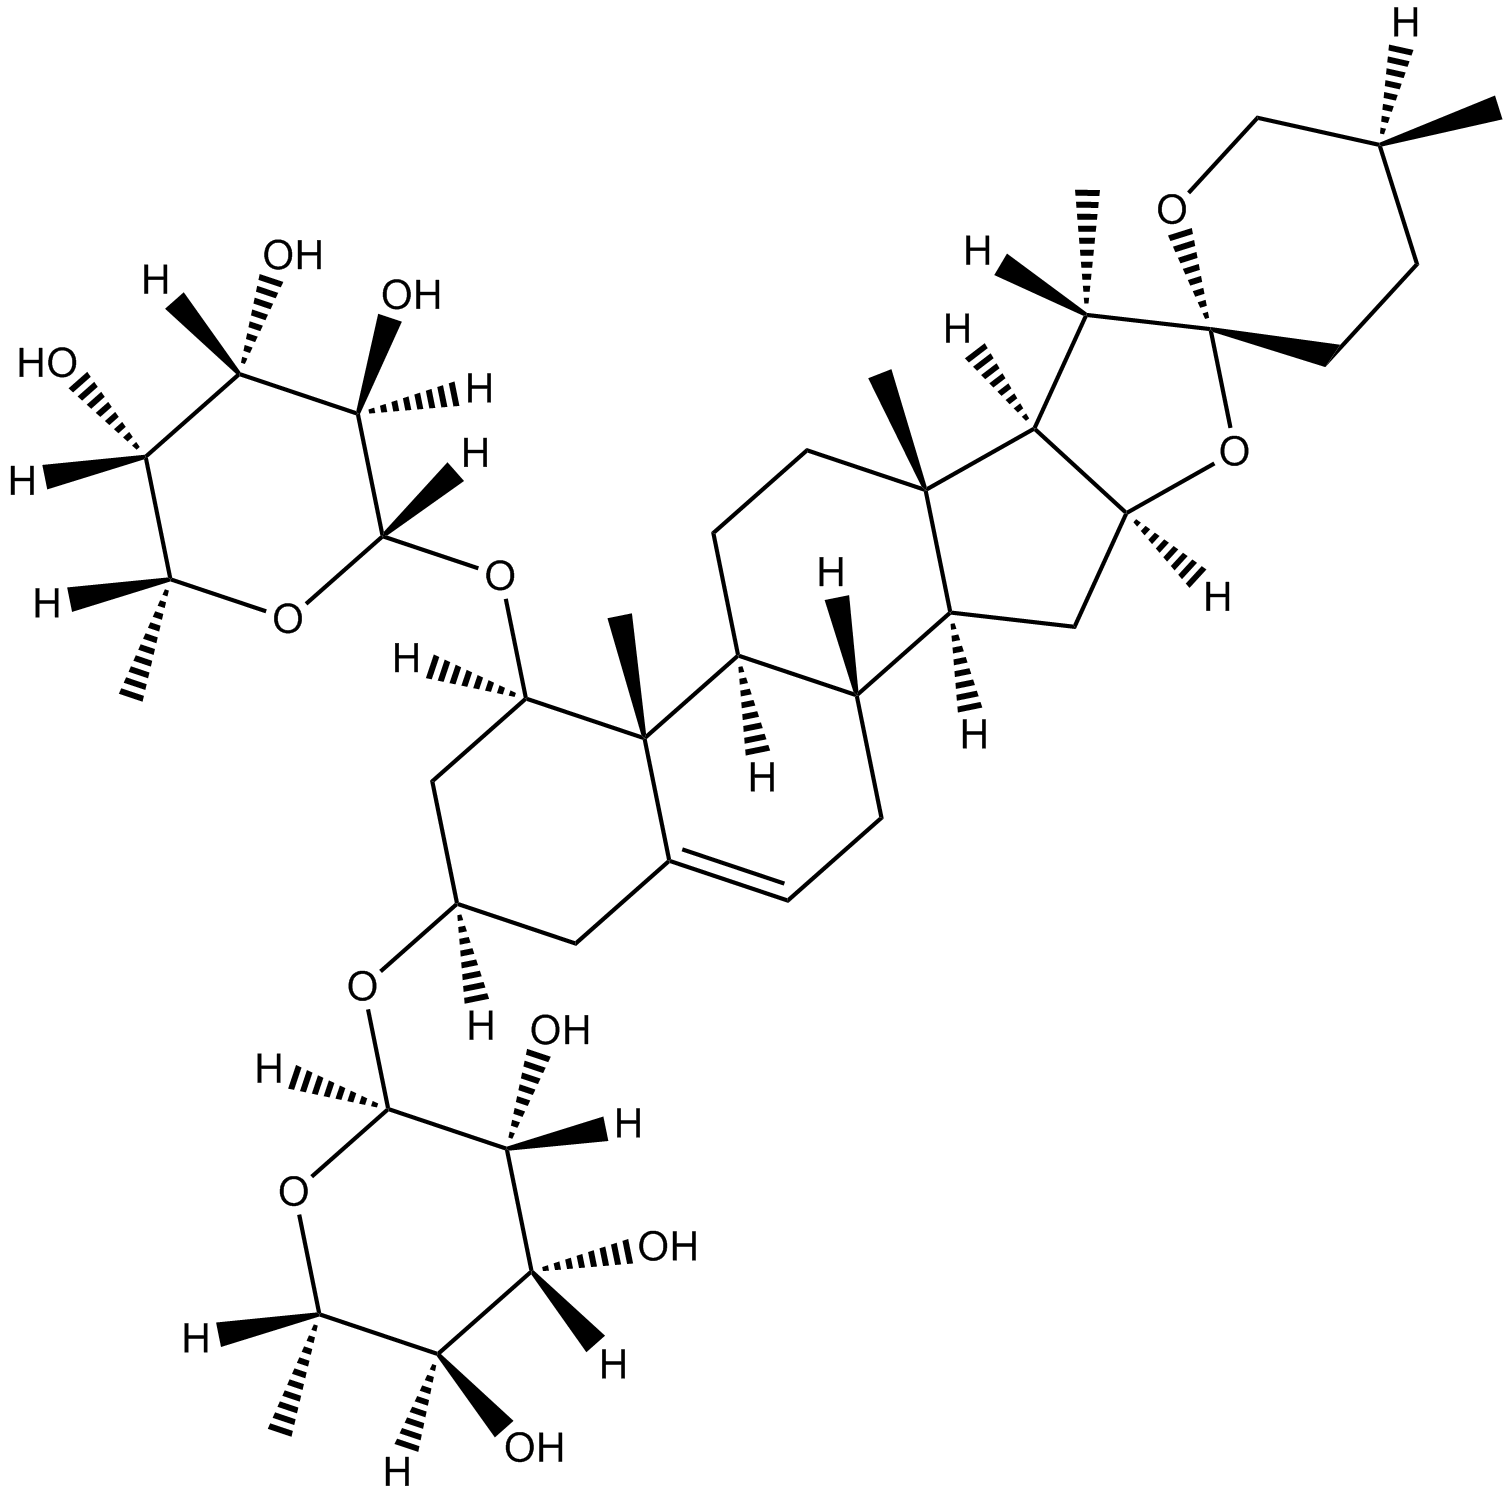 Liriopesides B Chemical Structure